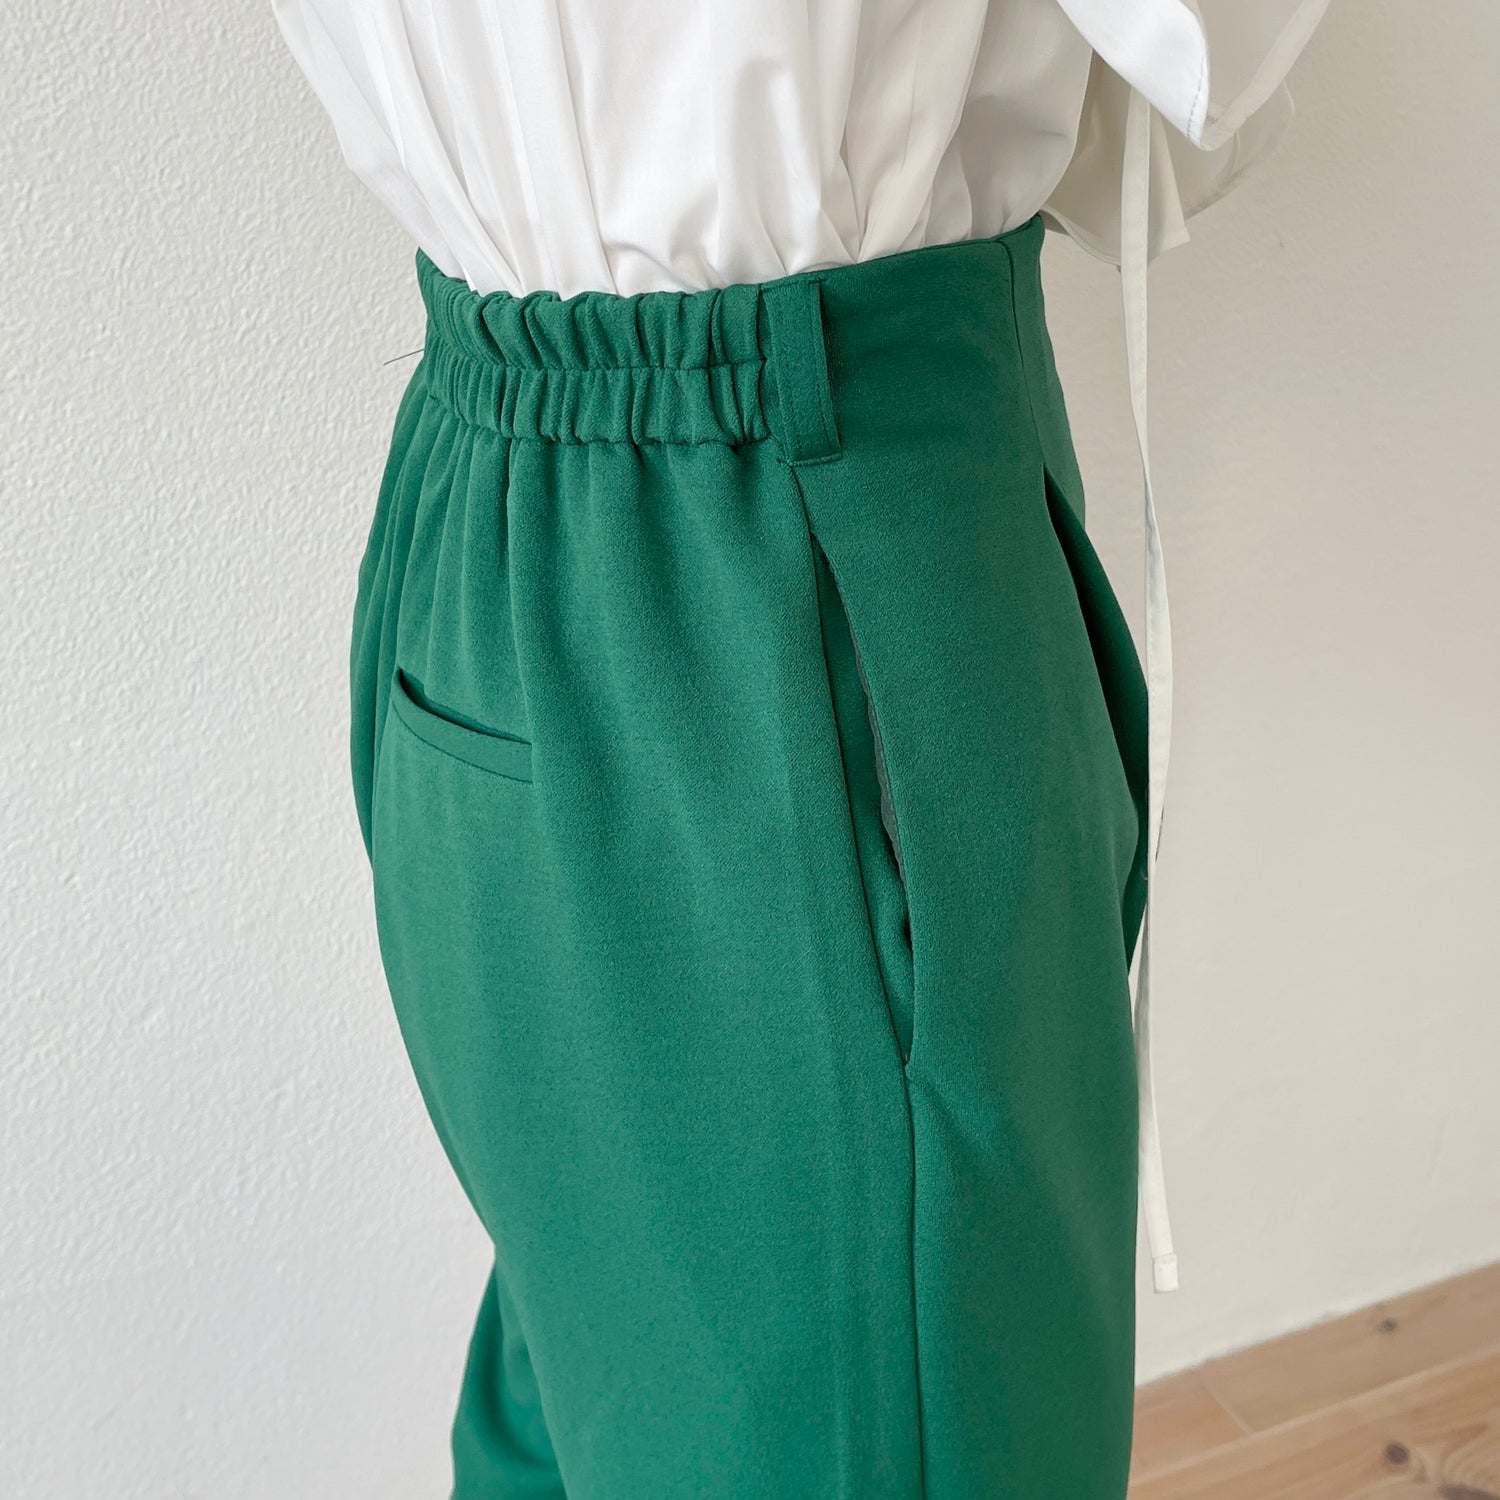 relax tapered pants / green